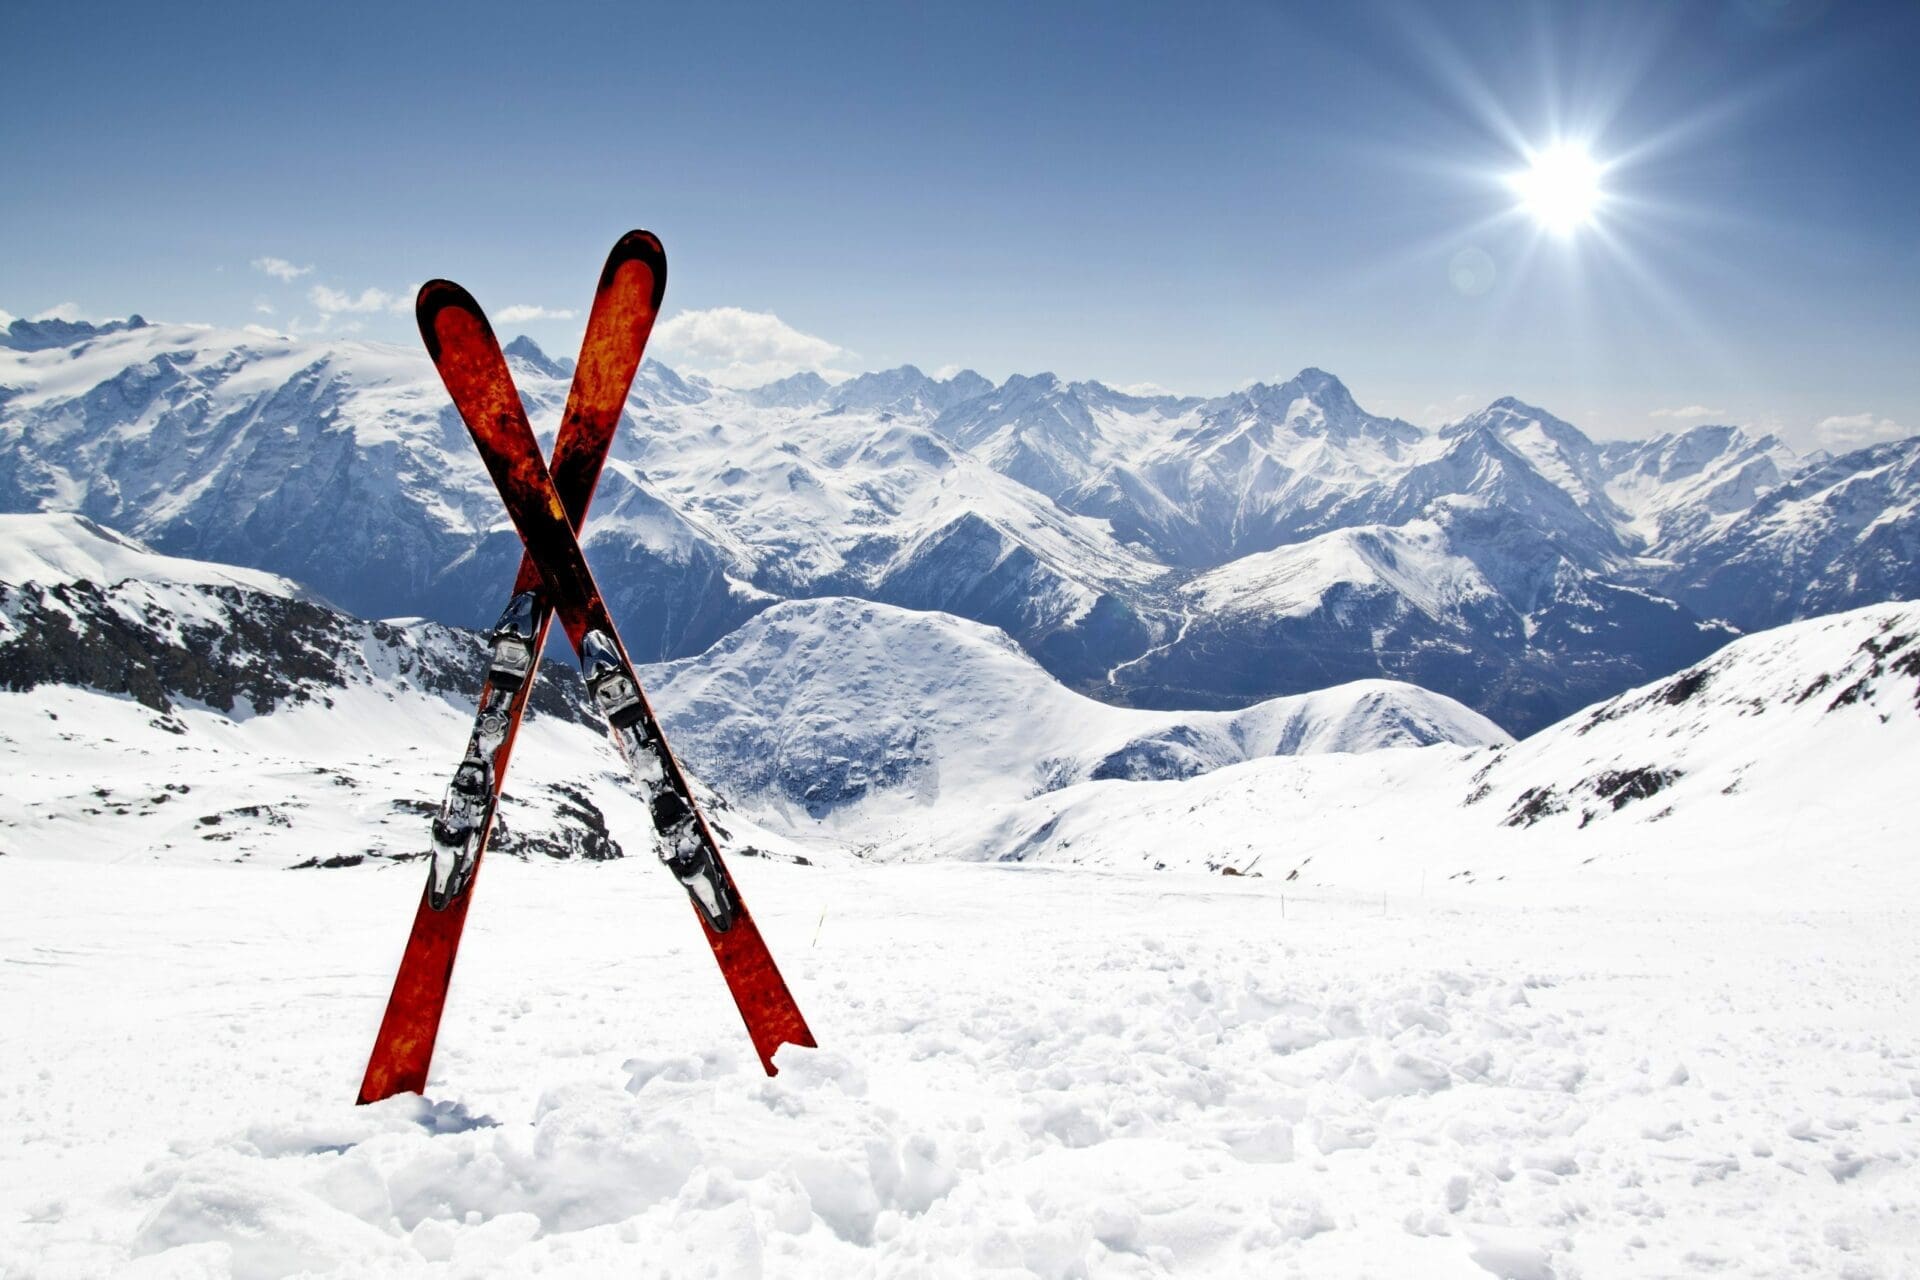 Skiing is believing: Why a growing number of watch brands are hitting the slopes